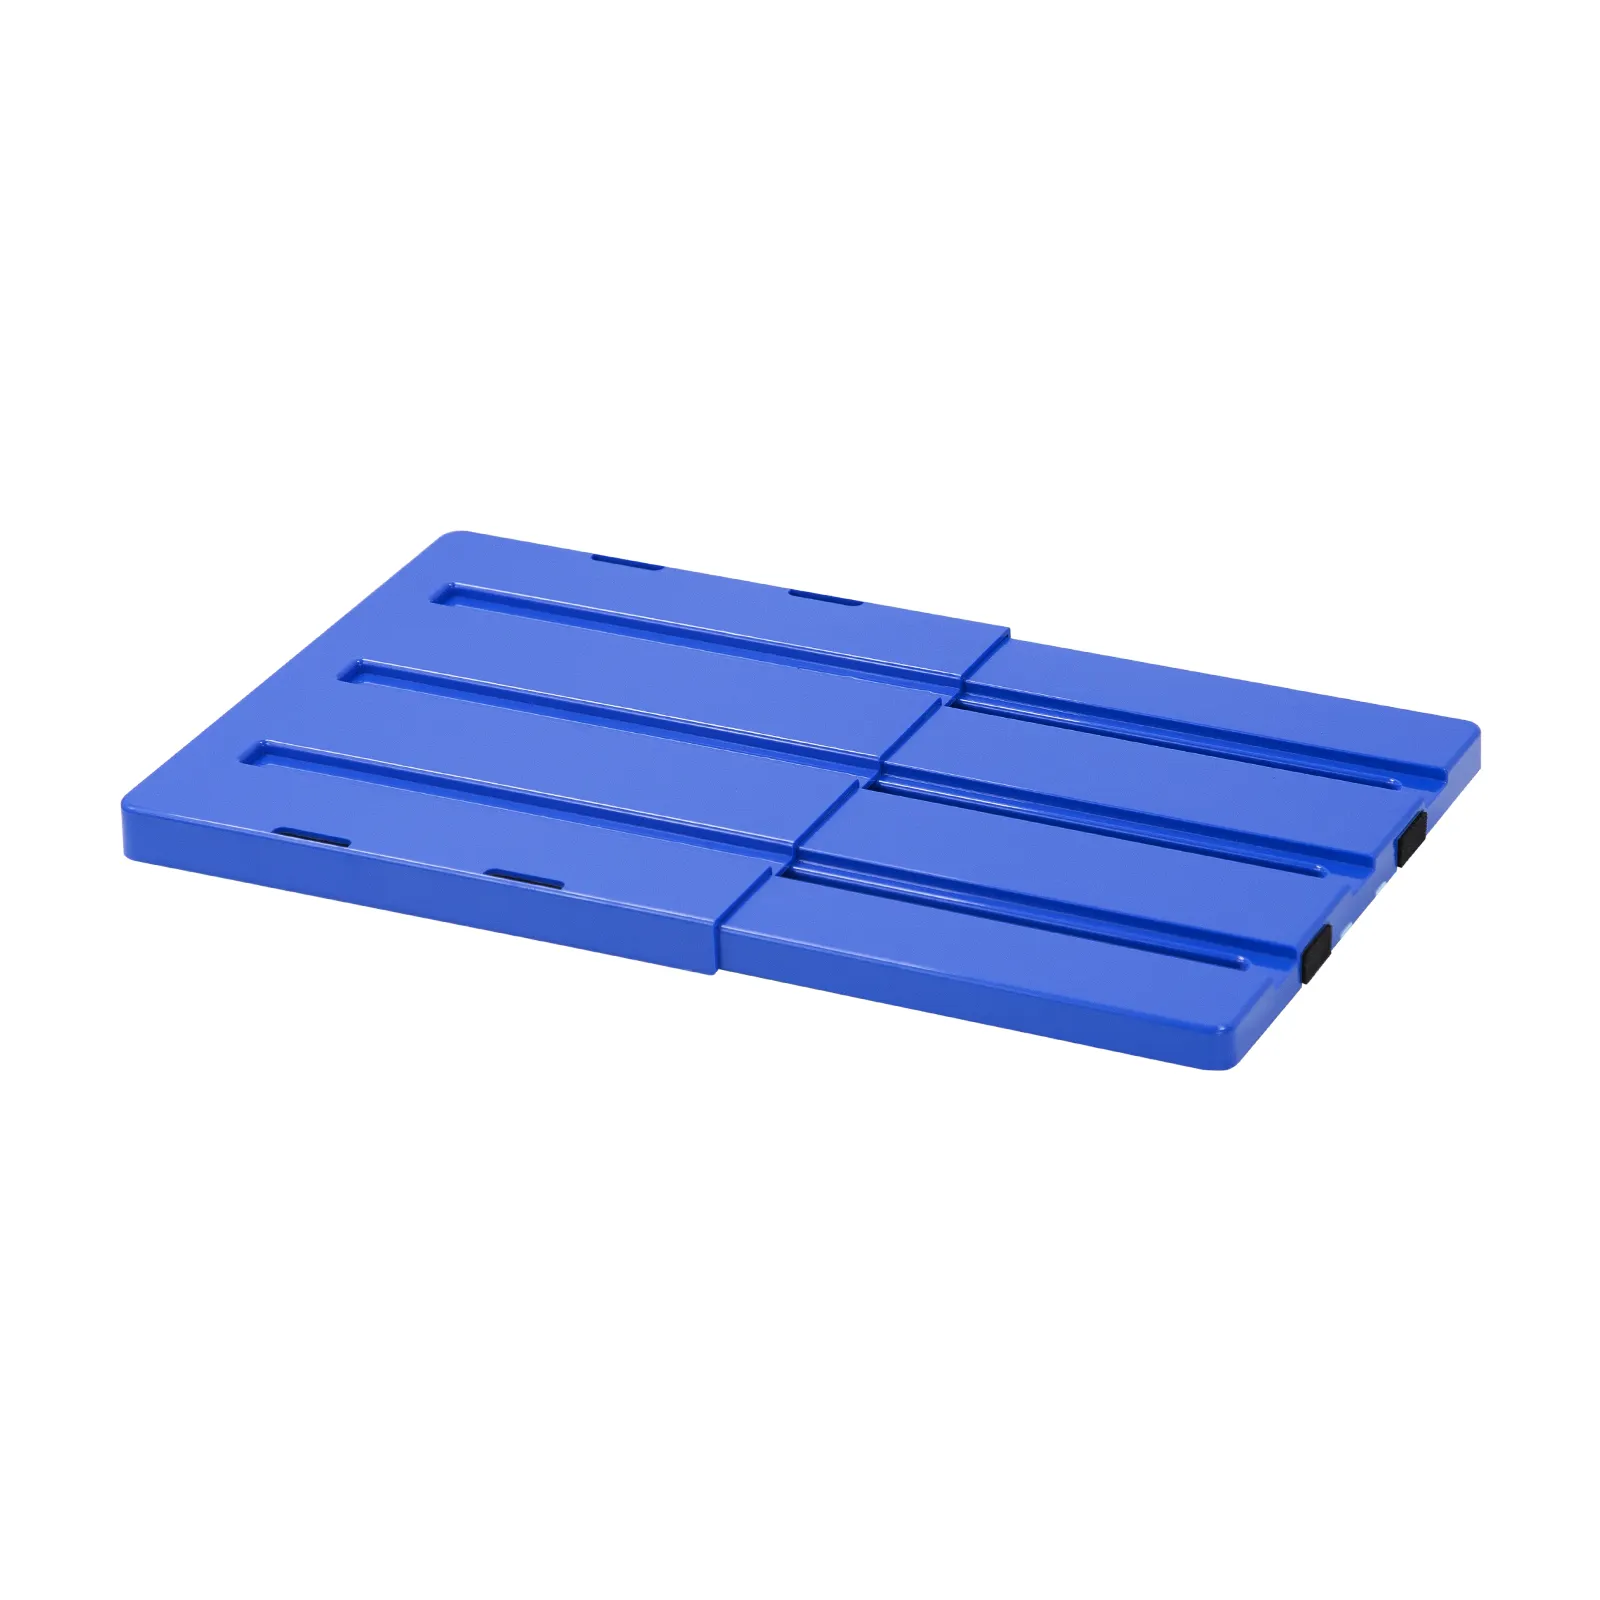 Adjust Shelf Locker Shelf  Extends to Fit Your Locker  Easy to Use  Perfect for School  Office  Gym Replacement Shelf Blue 